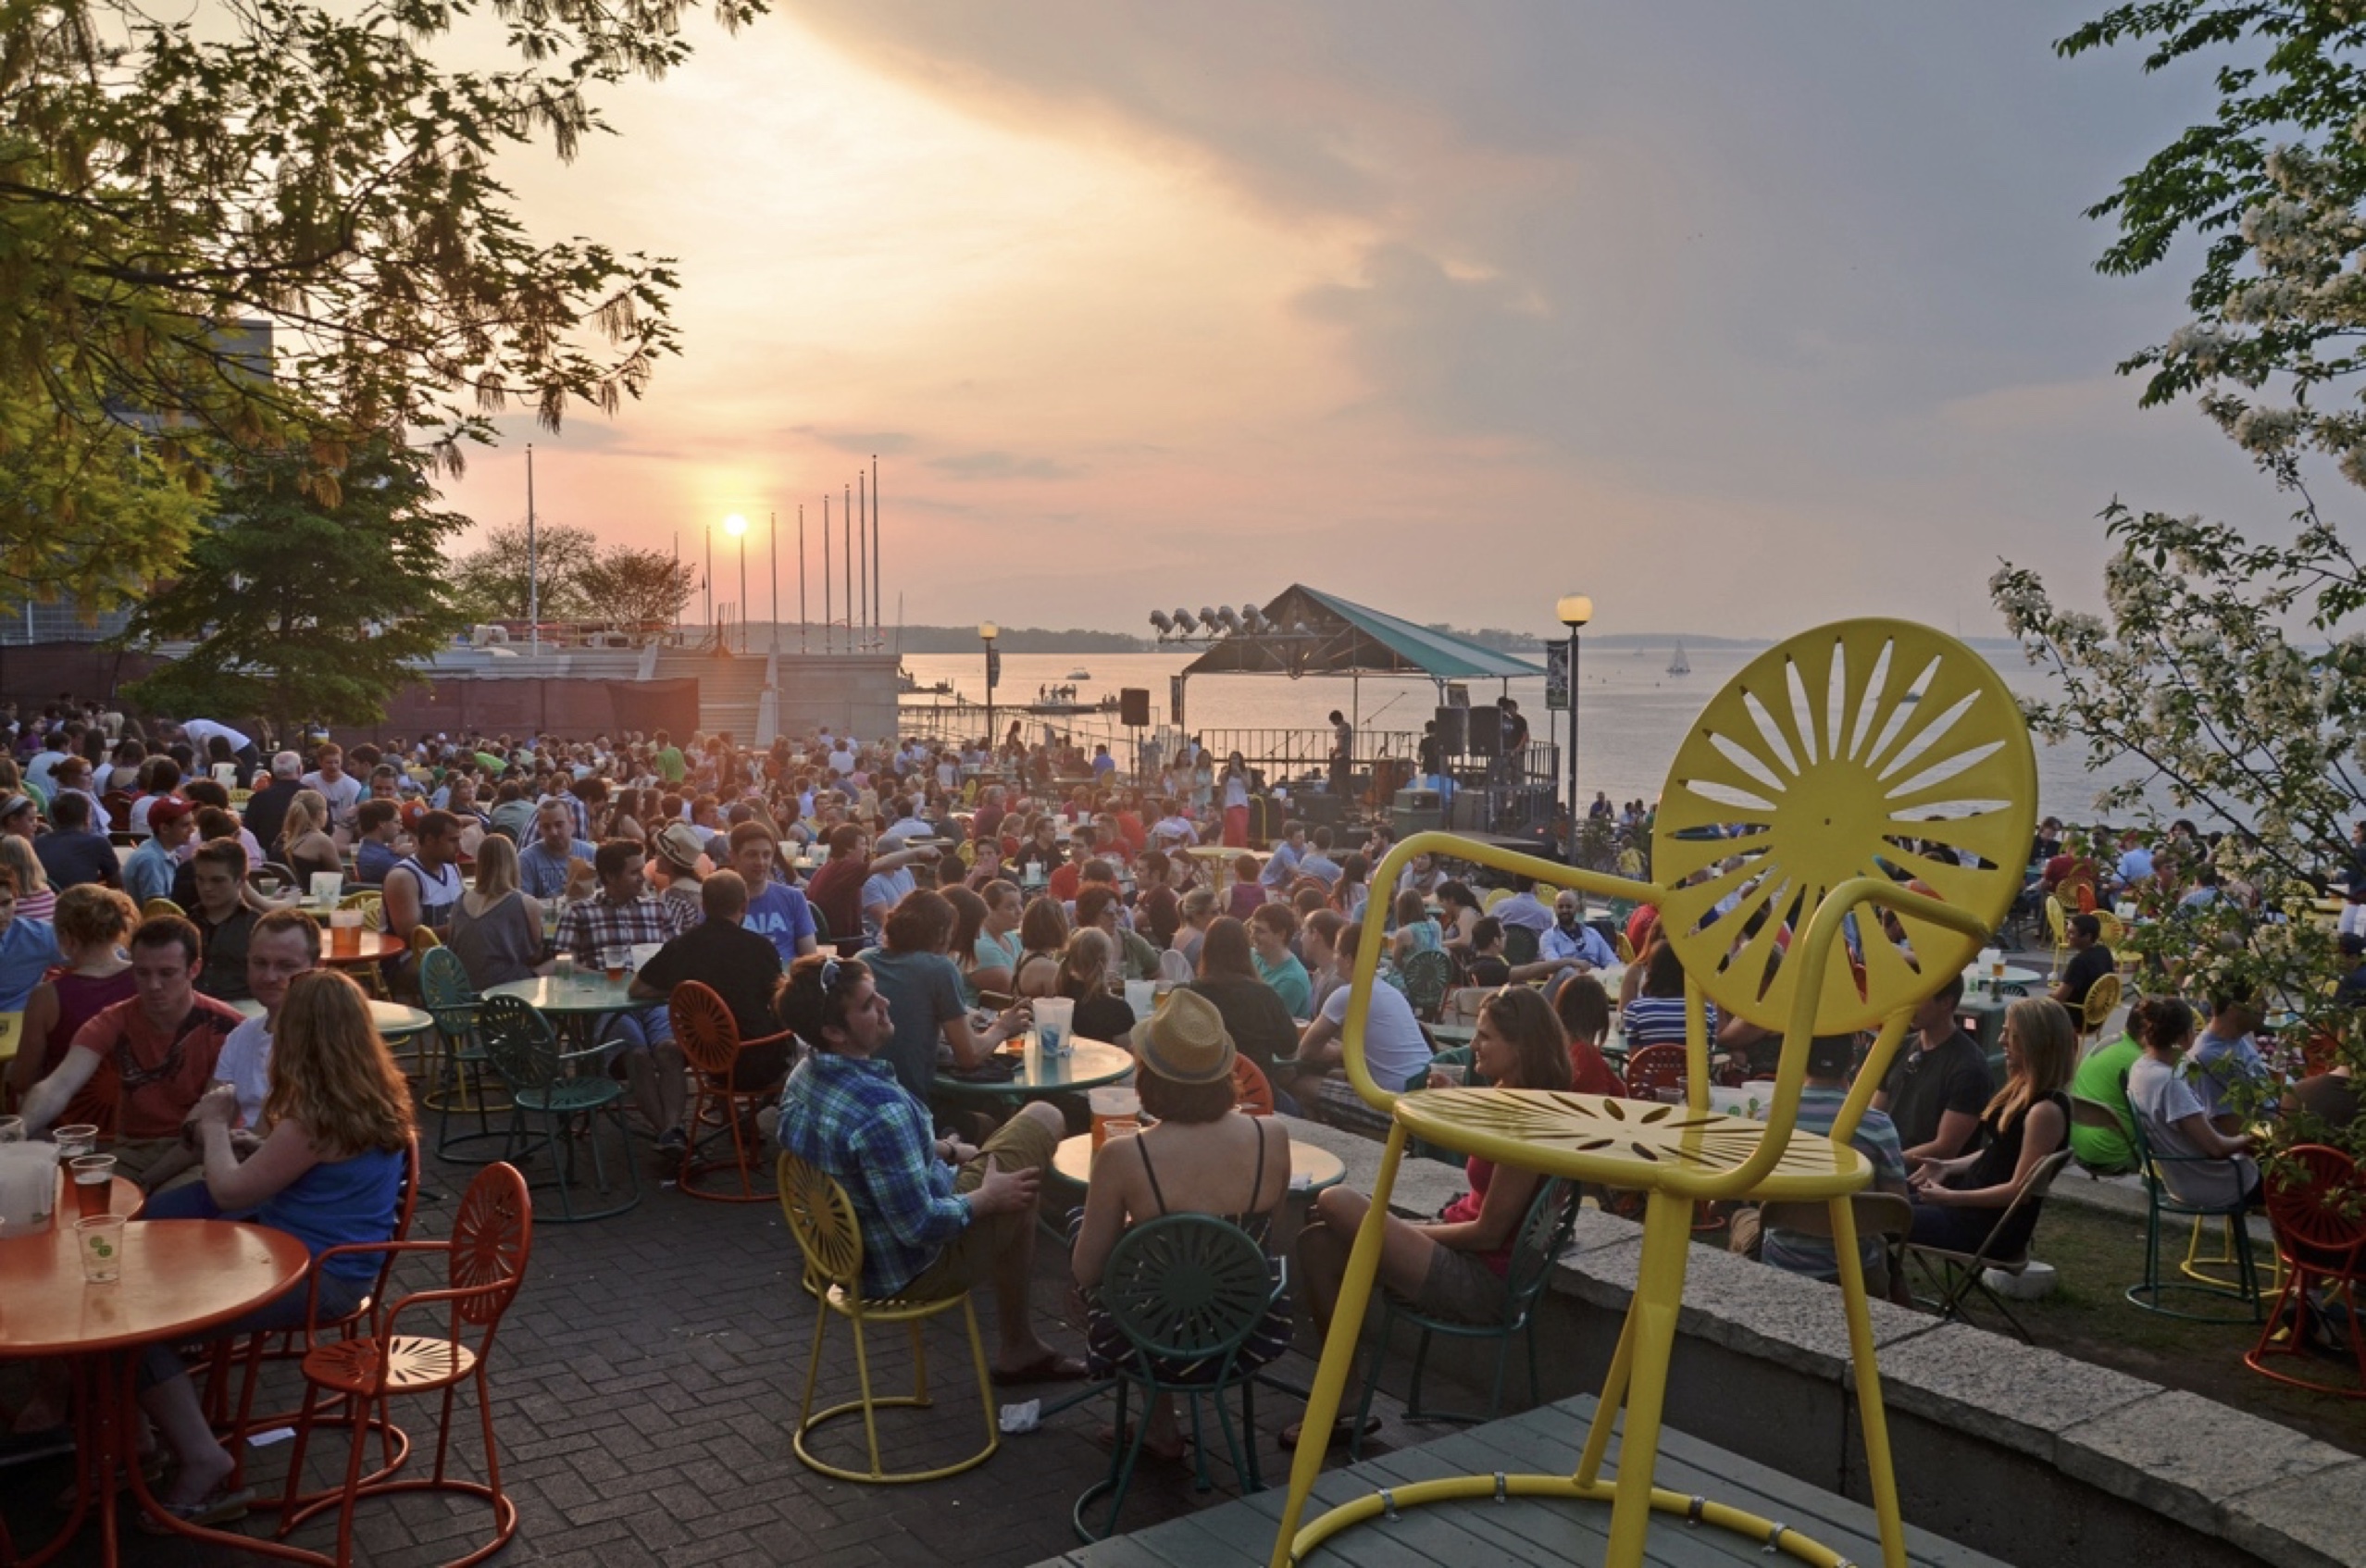 Photo of the Memorial Union Terrace overlooking Lake Mendota in Madison, Wisconsin